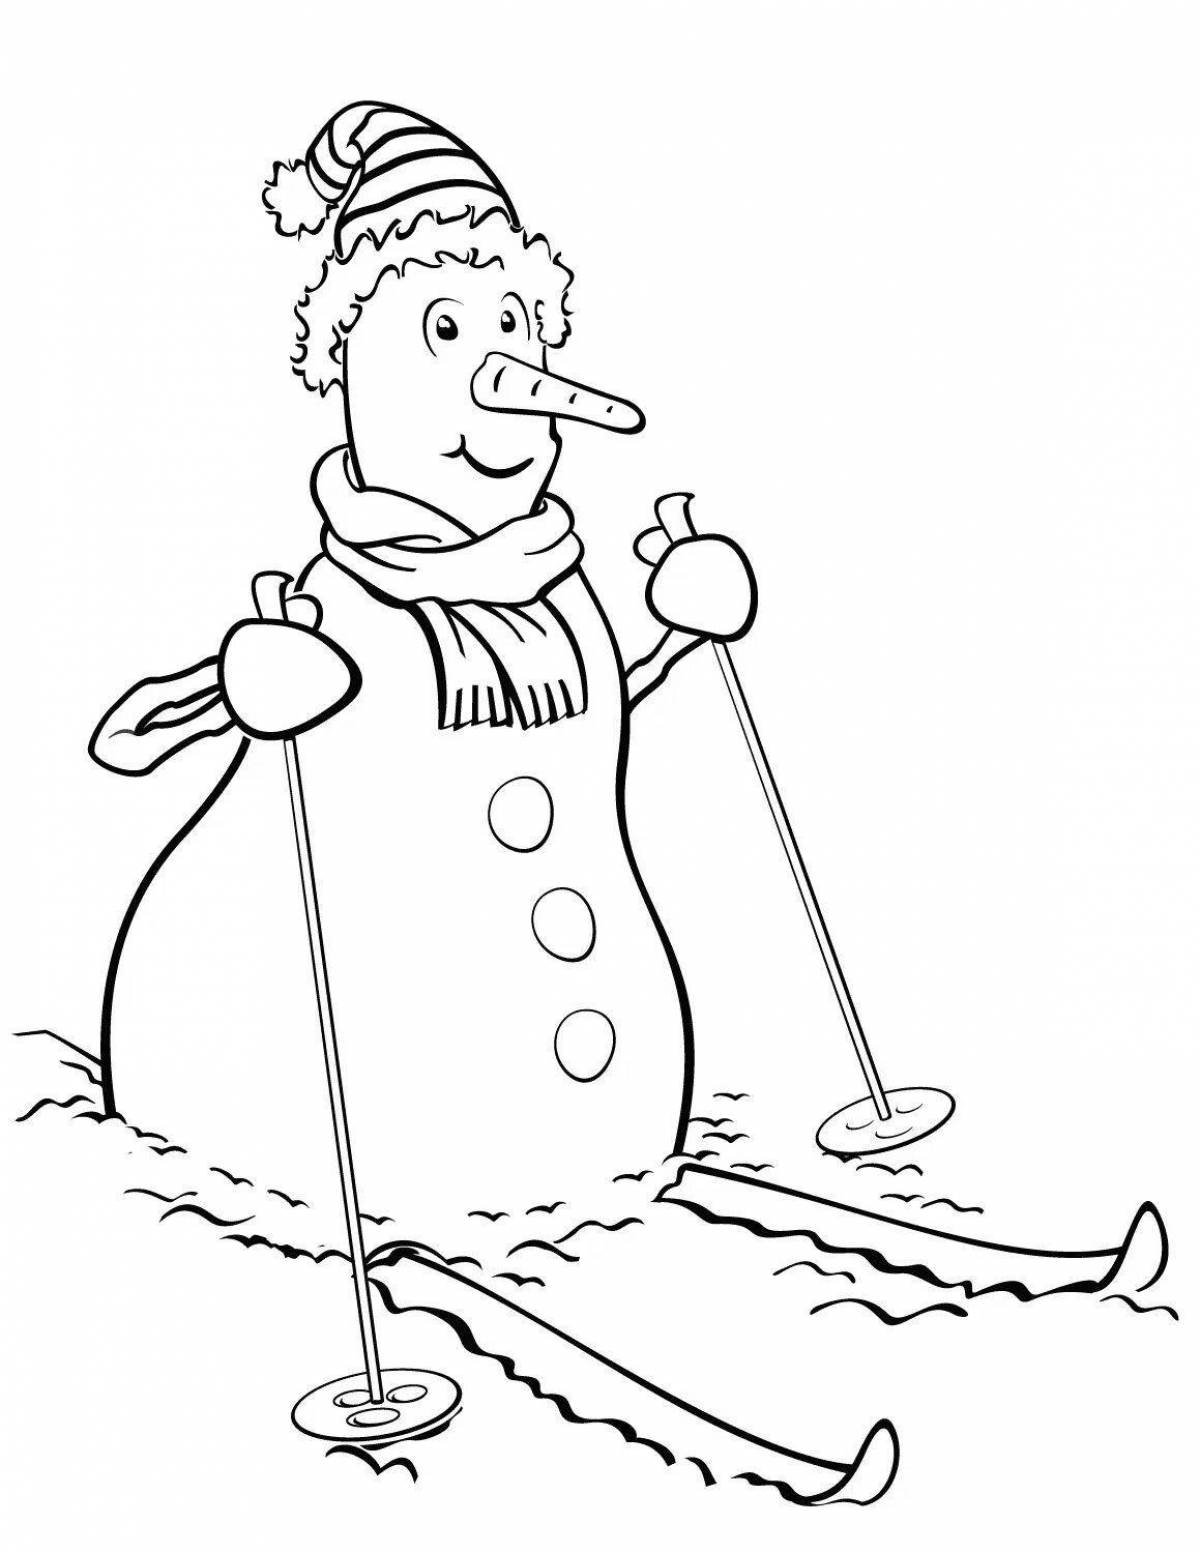 Animated coloring book snowman on skates for kids